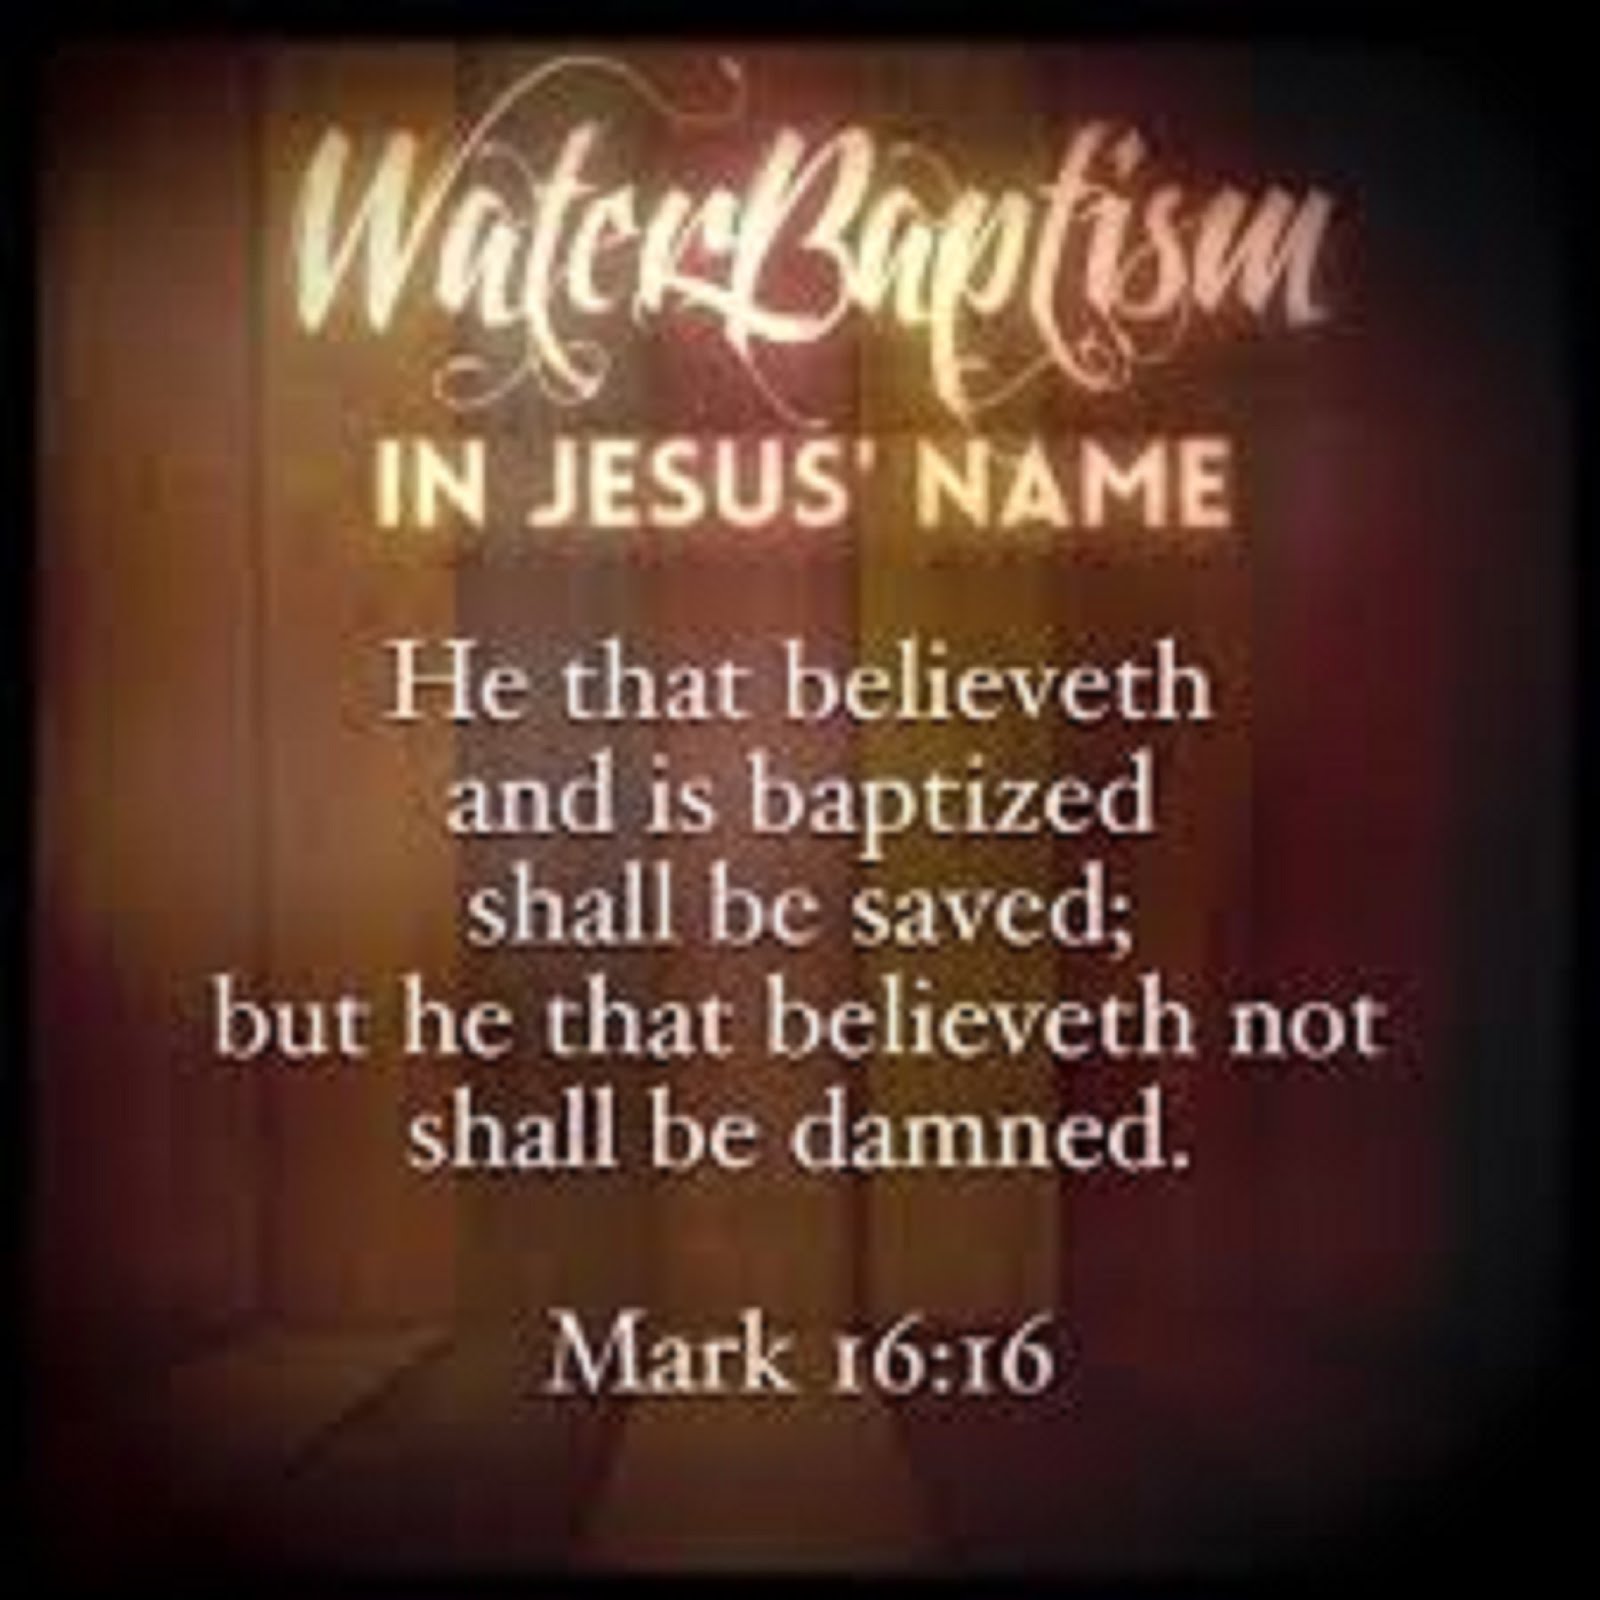 WATER BAPTISM - MARK 1616 - HE THAT BELIEVETH AND IS BAPTISED SHALL BE SAVED, BUT HE